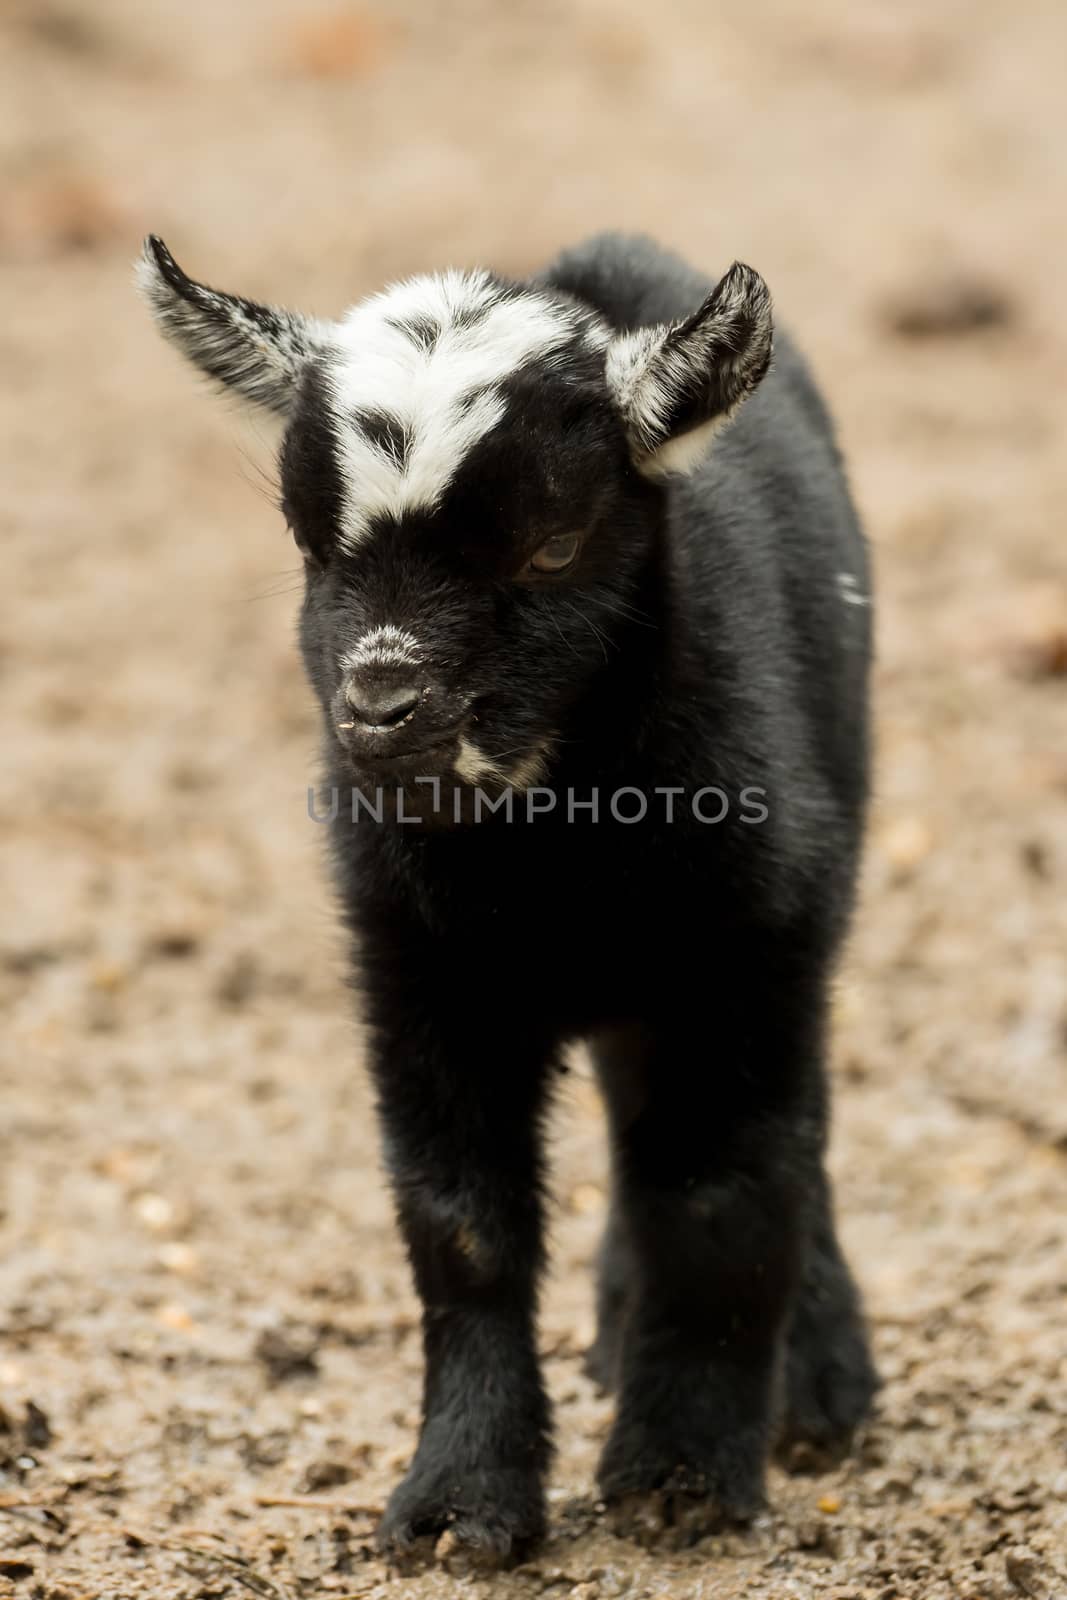 A young black and white goat stands outside